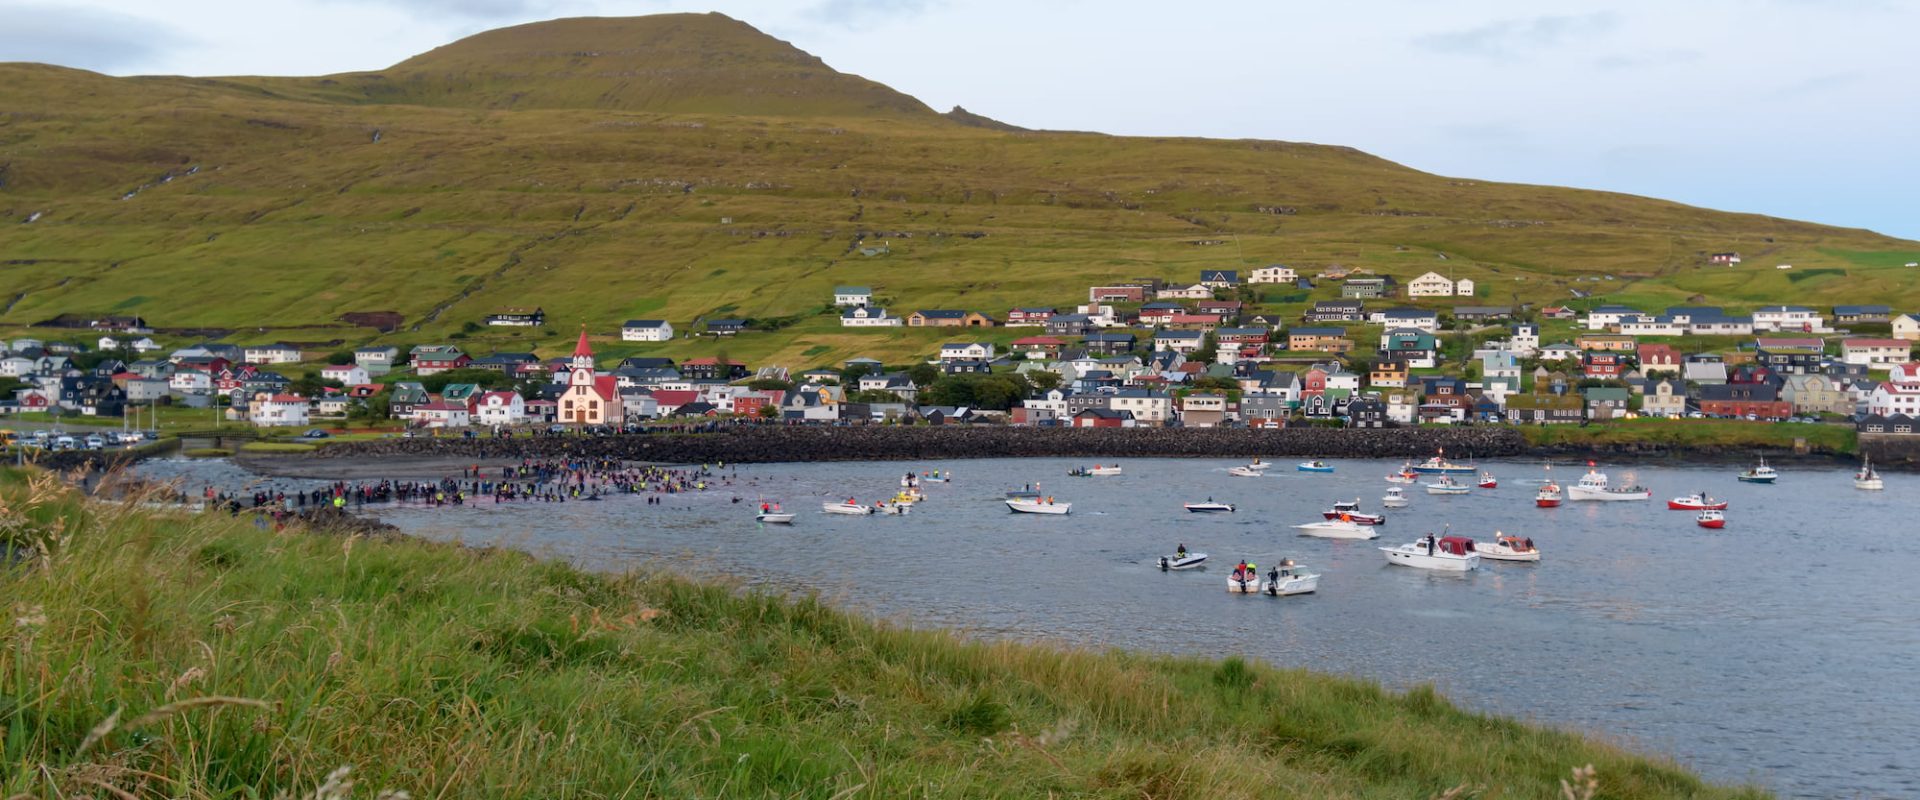 Petition to end the Faroe Islands whale and dolphin slaughter Animals